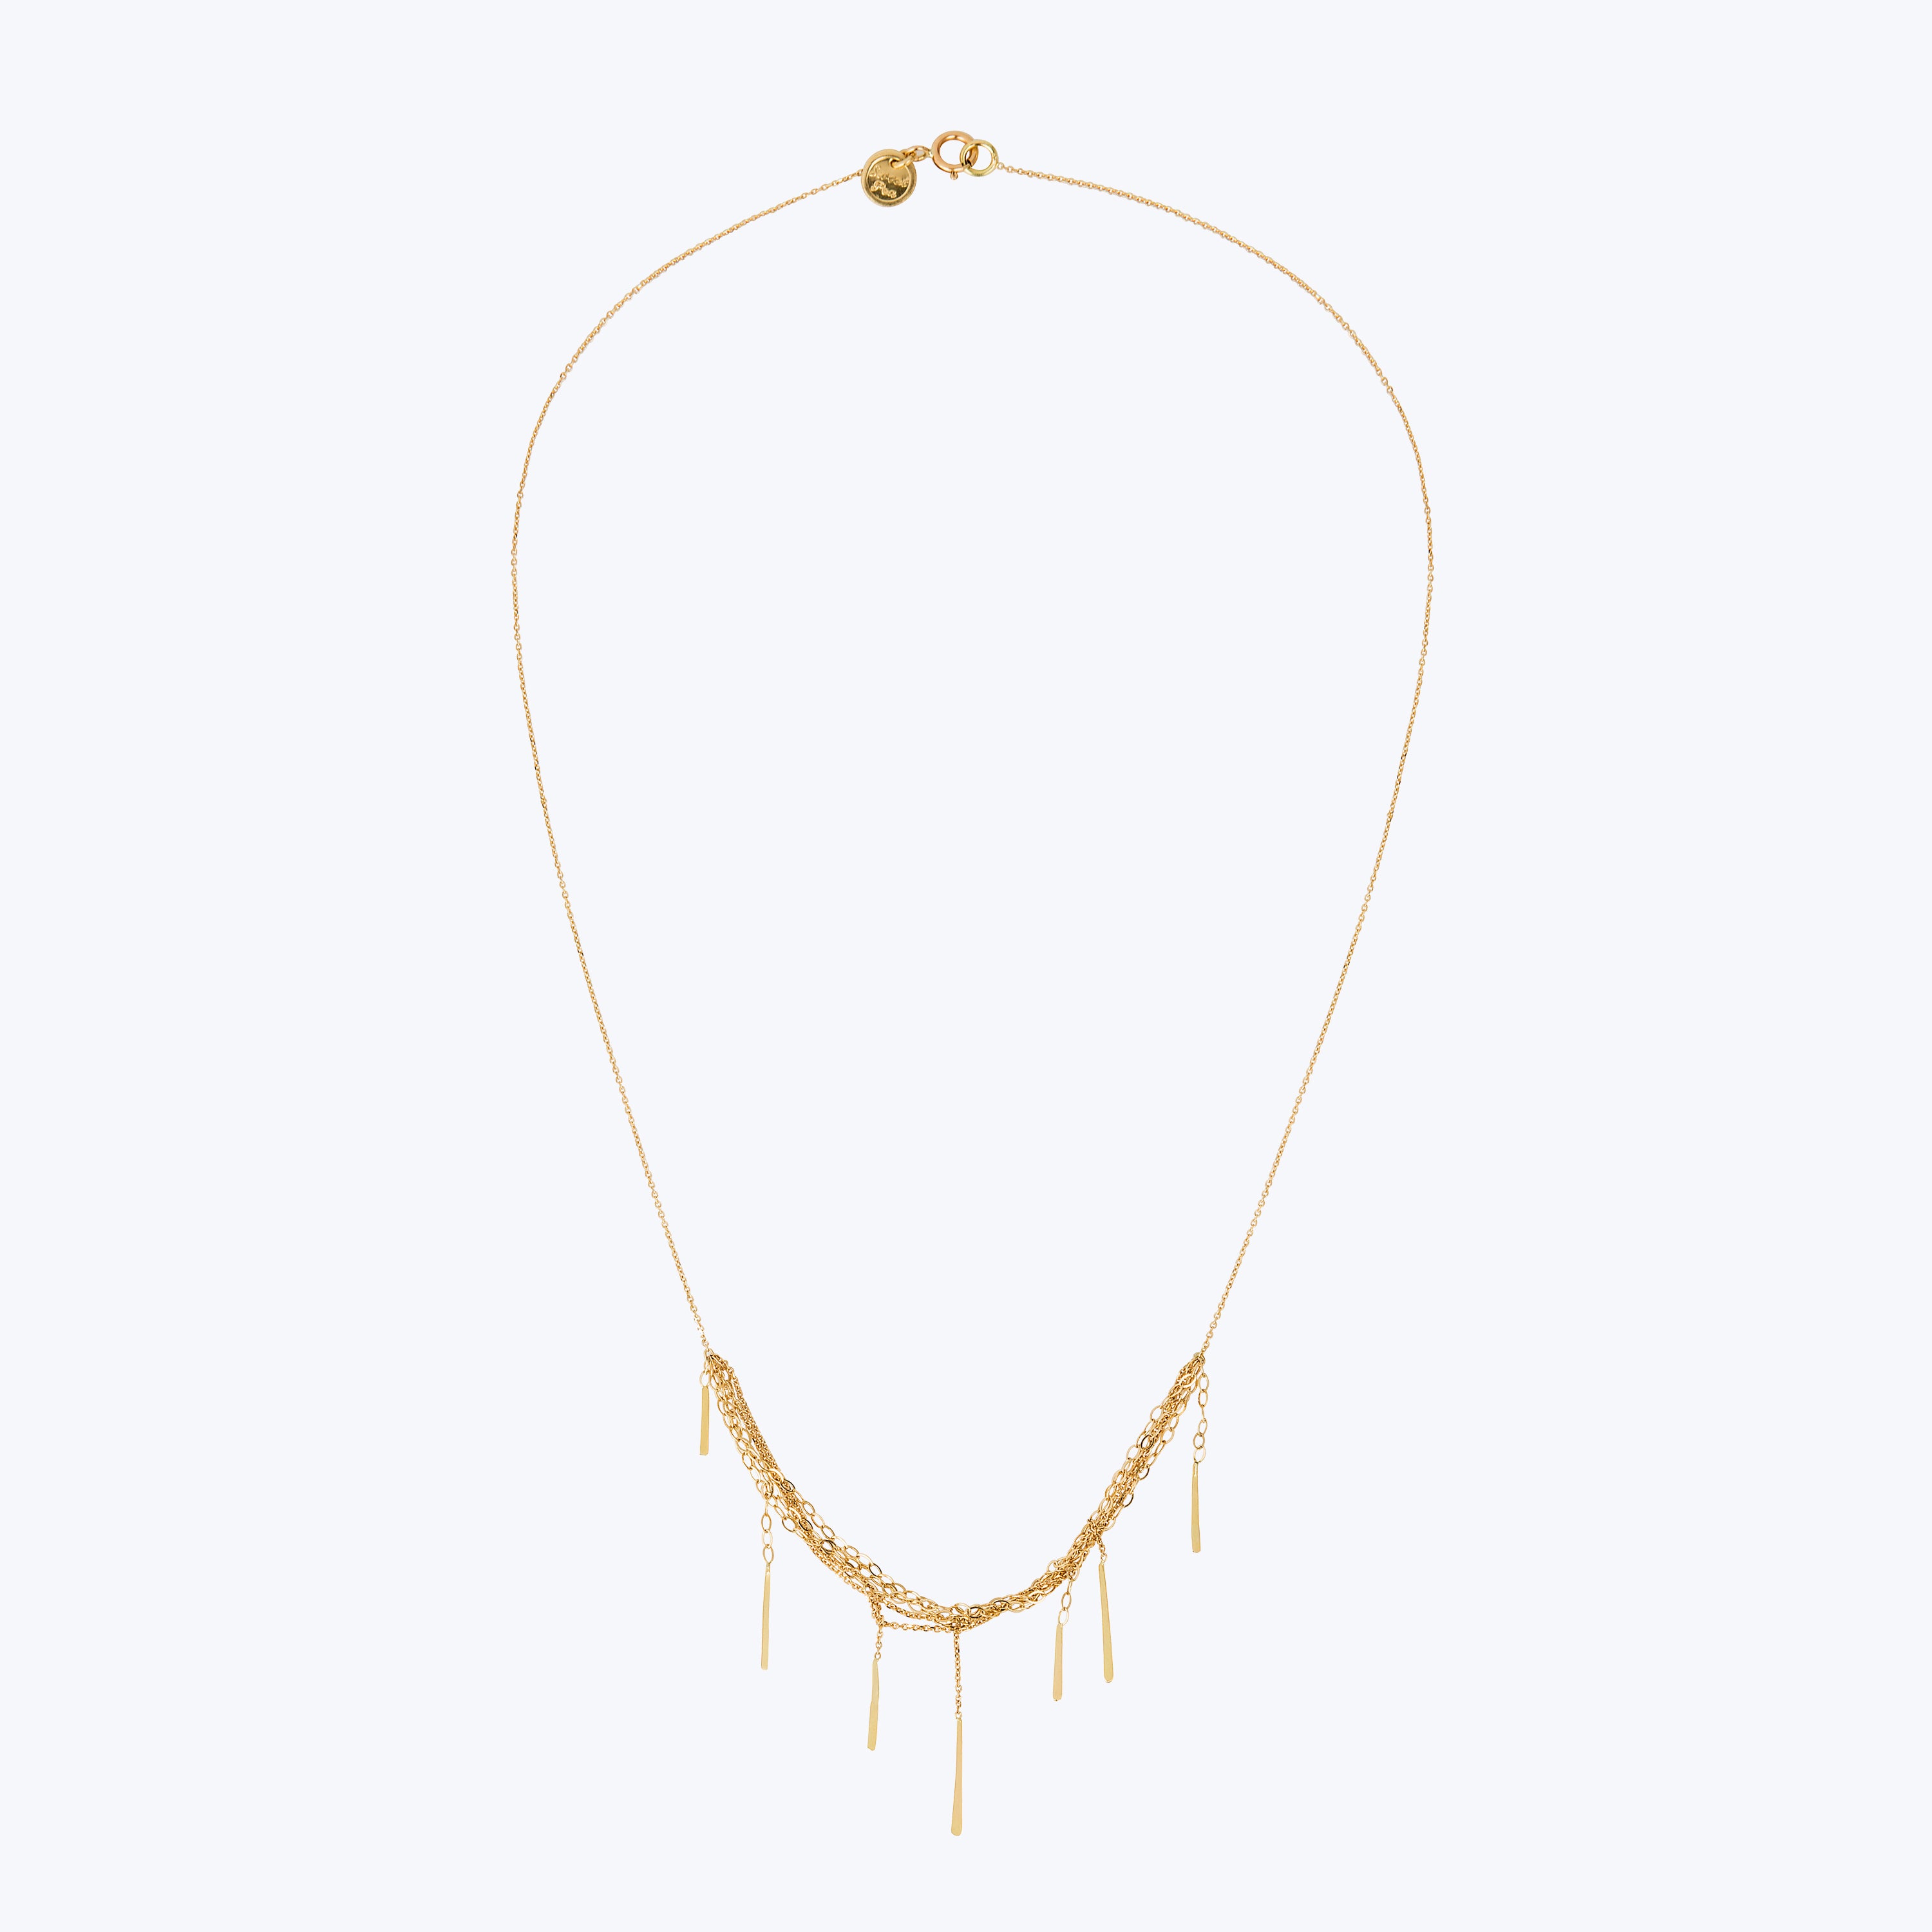 Sycamore 18kt Gold Short Necklace - 40cm